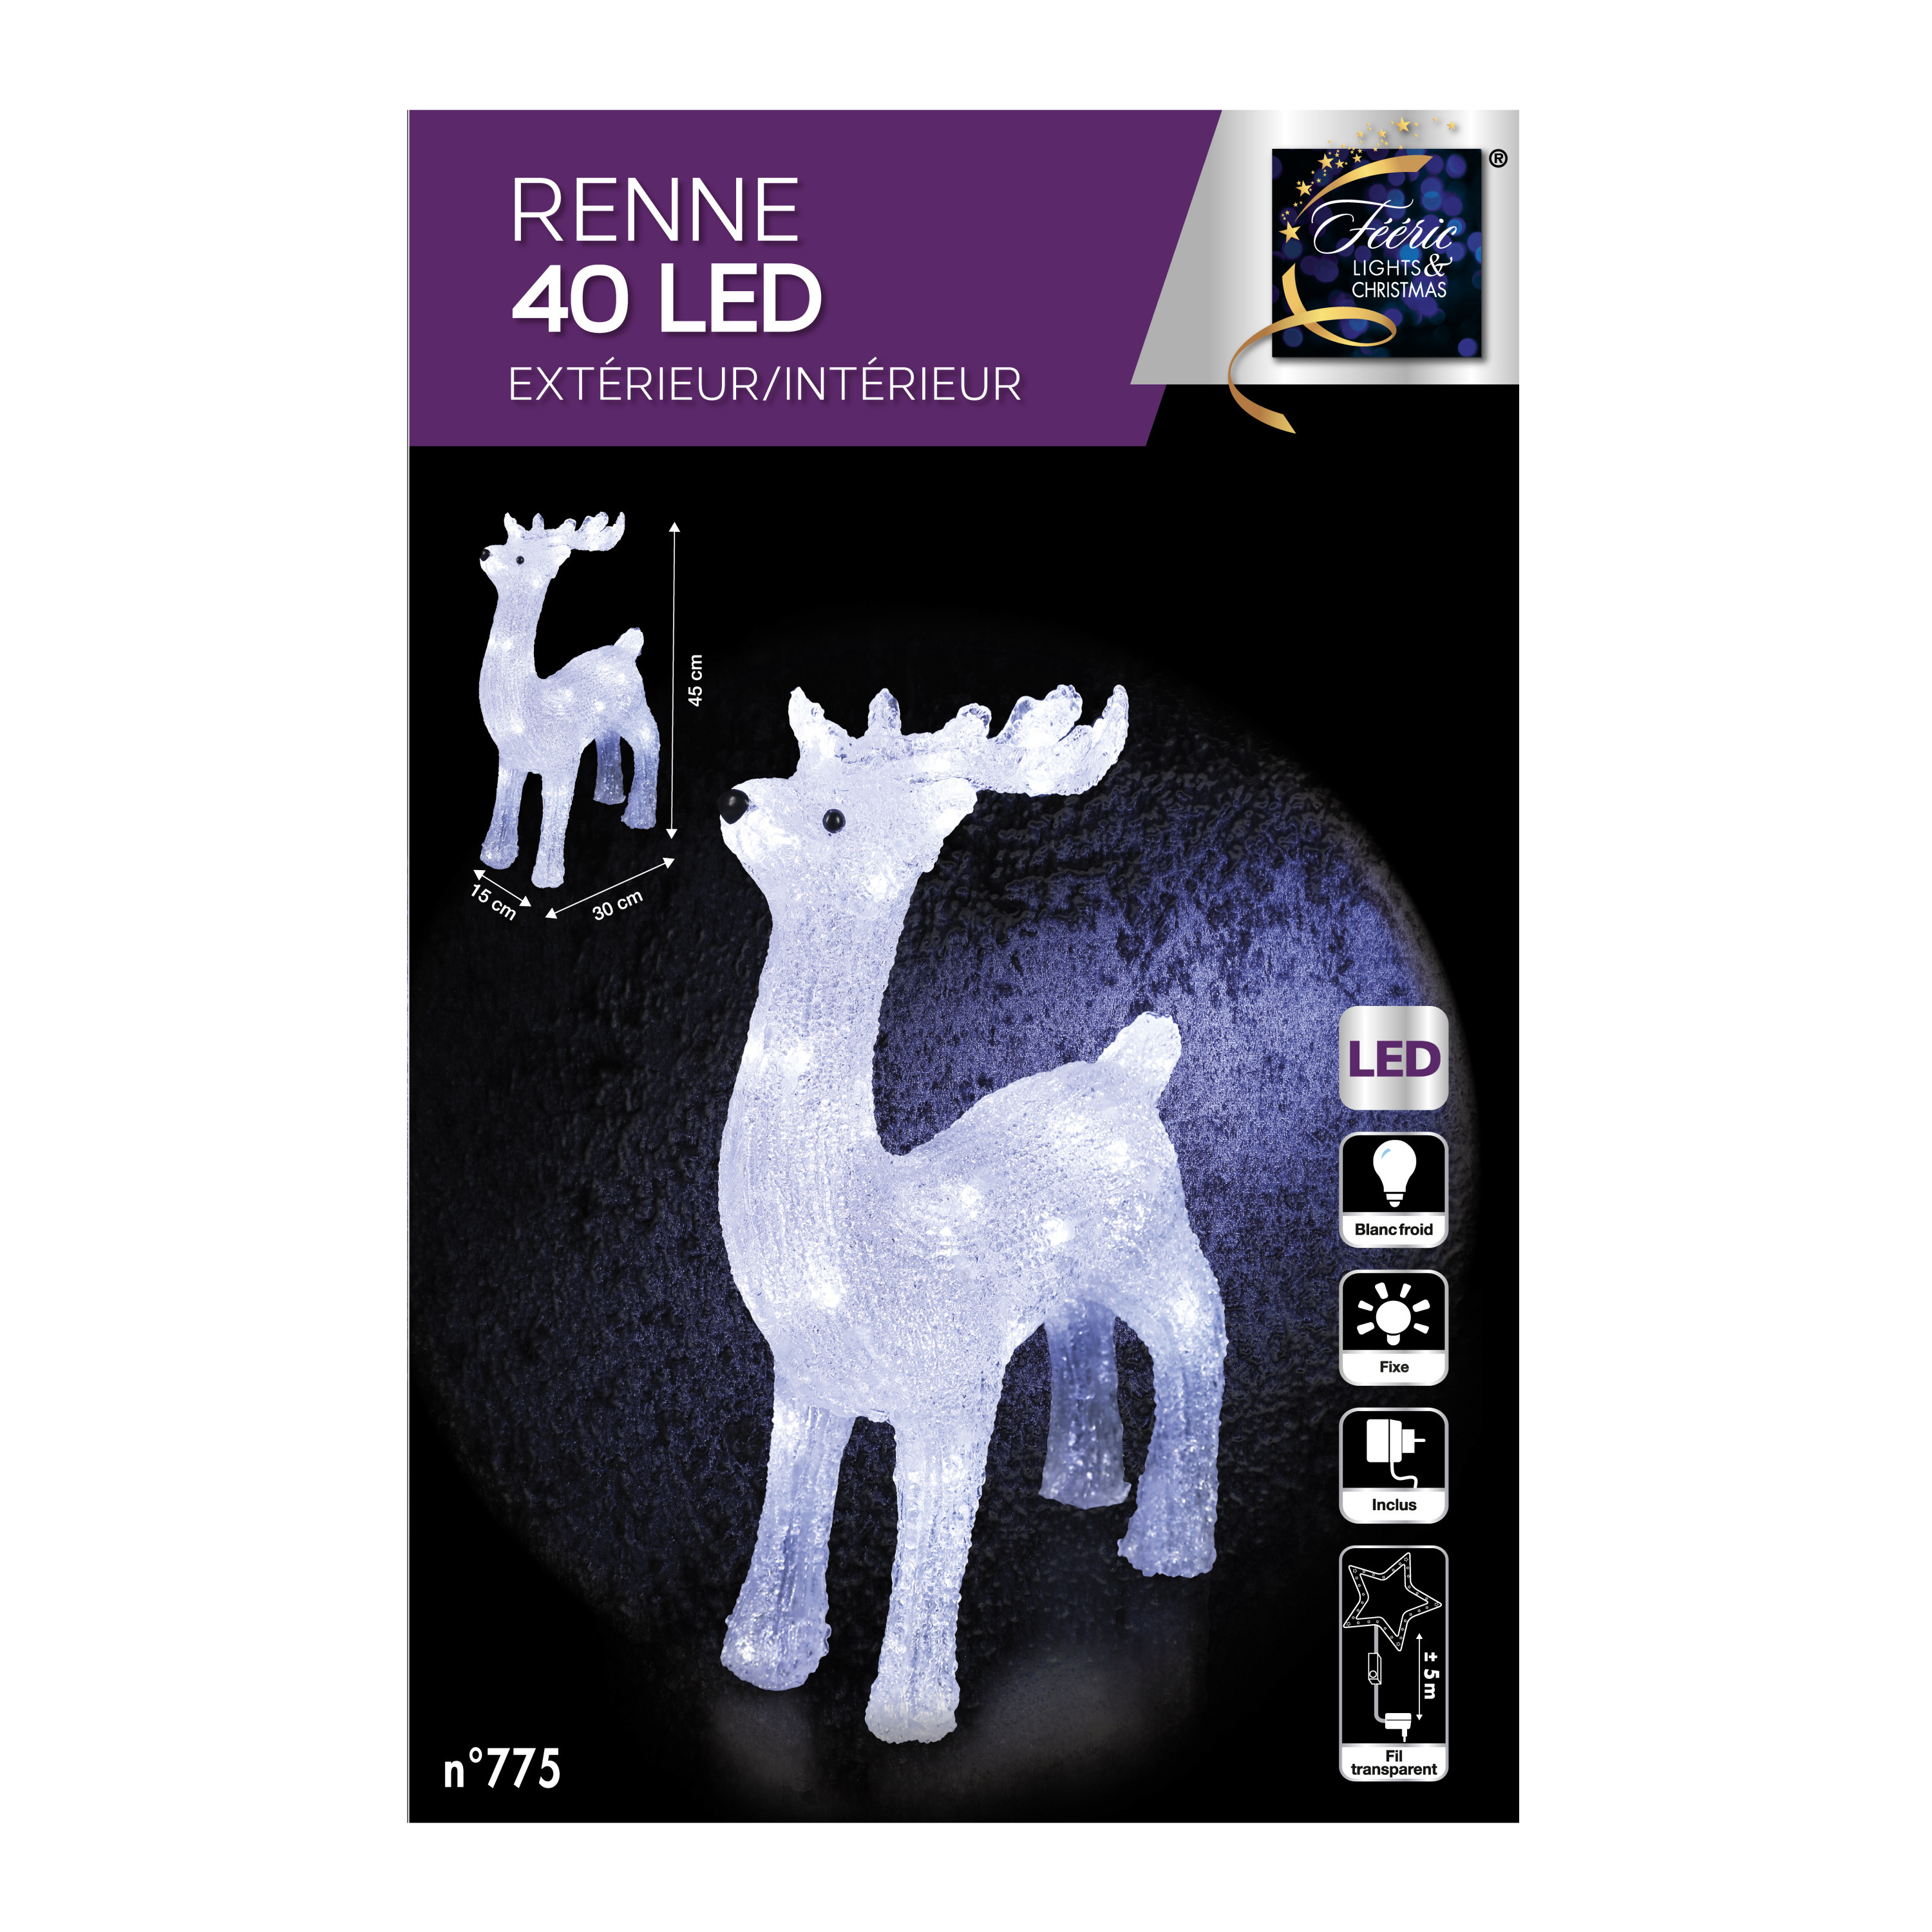 Feeric lights and christmas - LED verlichte rendier - 45,5 cm - 40 leds